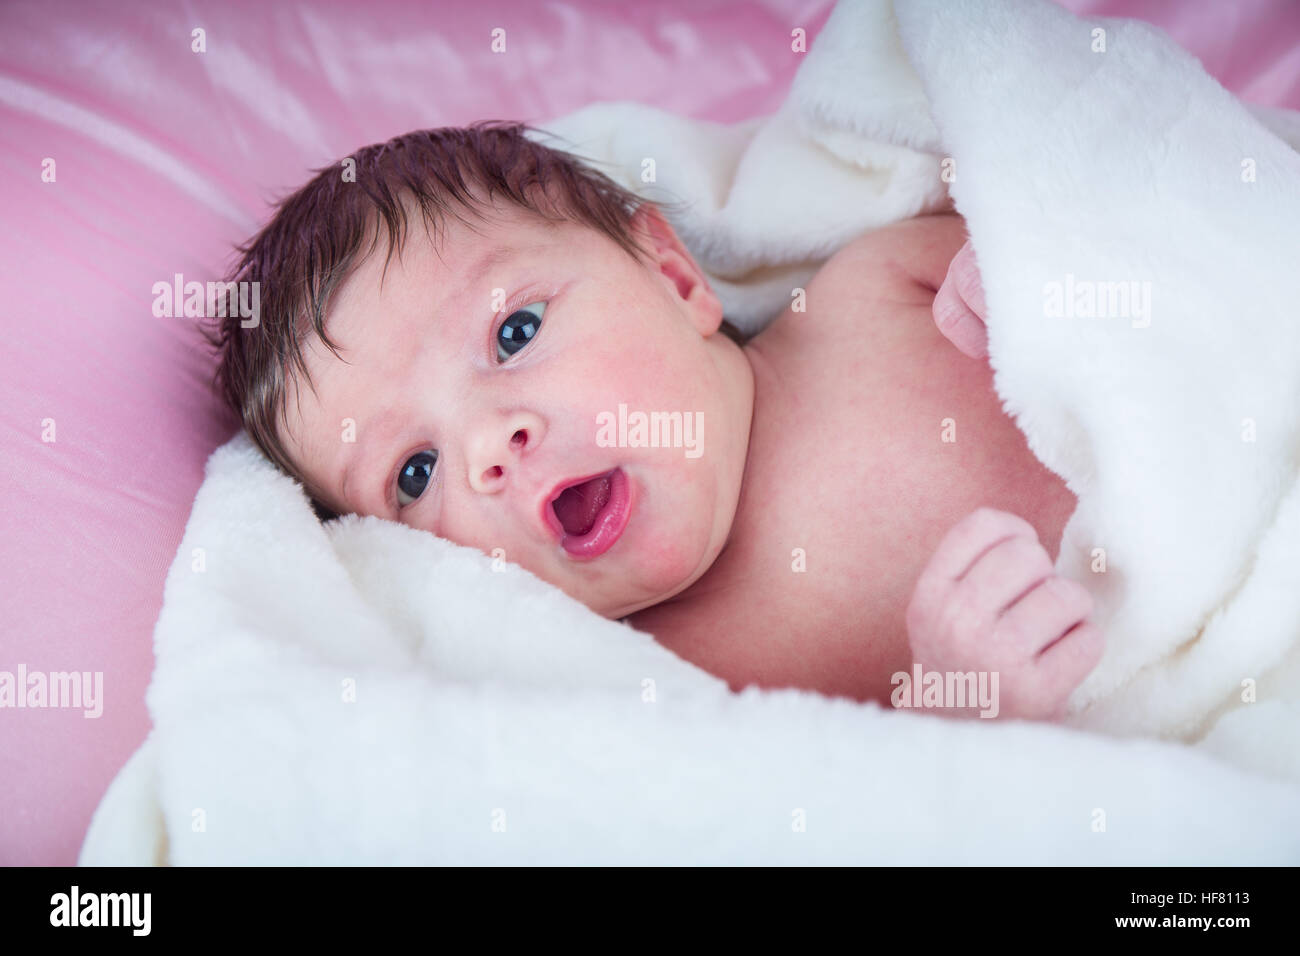 Twelve day old baby girl wrapped in a blanket Stock Photo